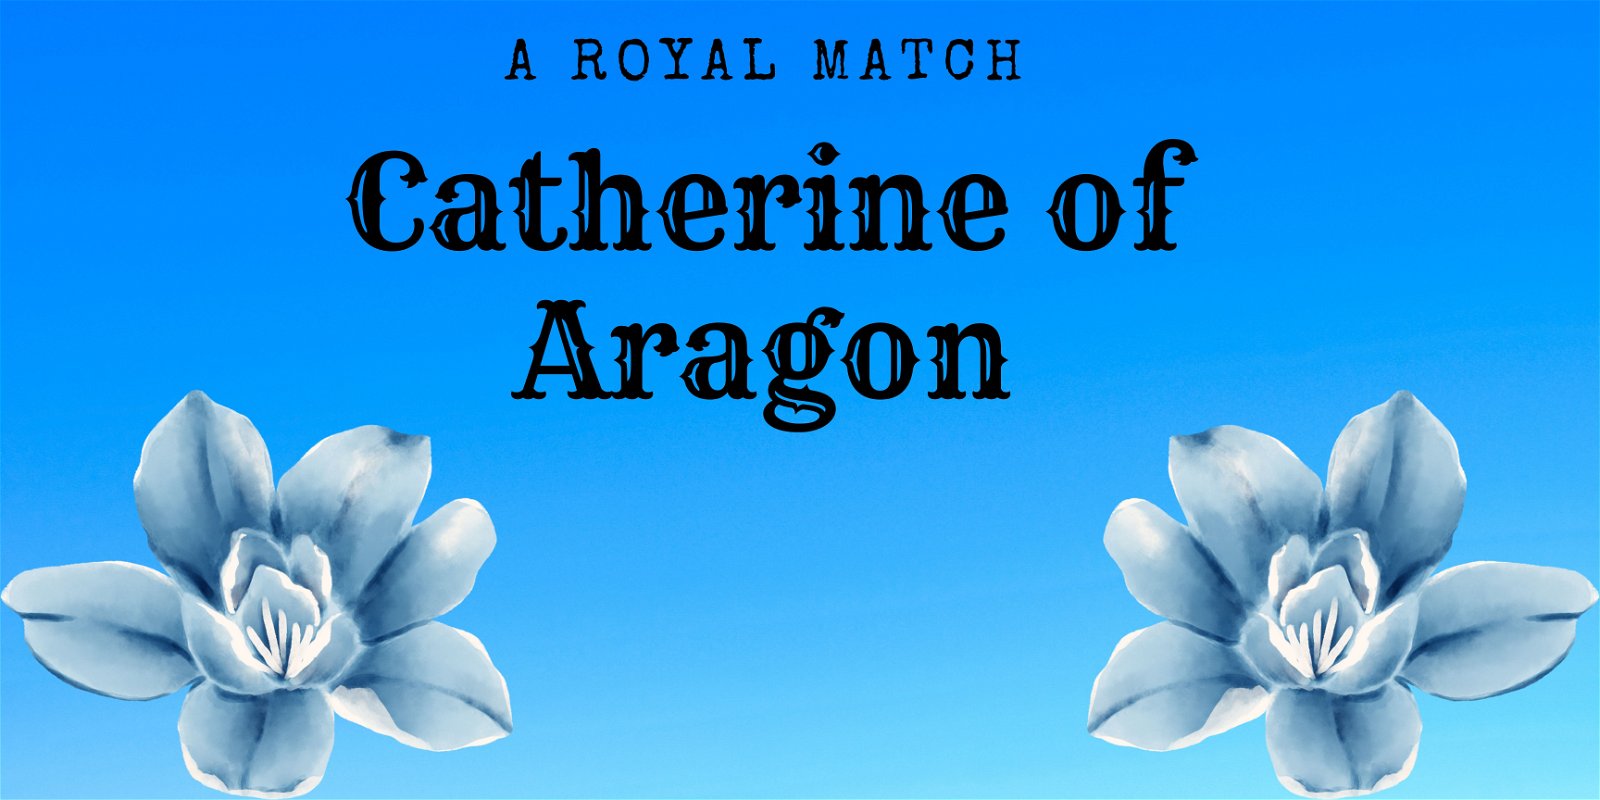 The Royal Match: Catherine of Aragon